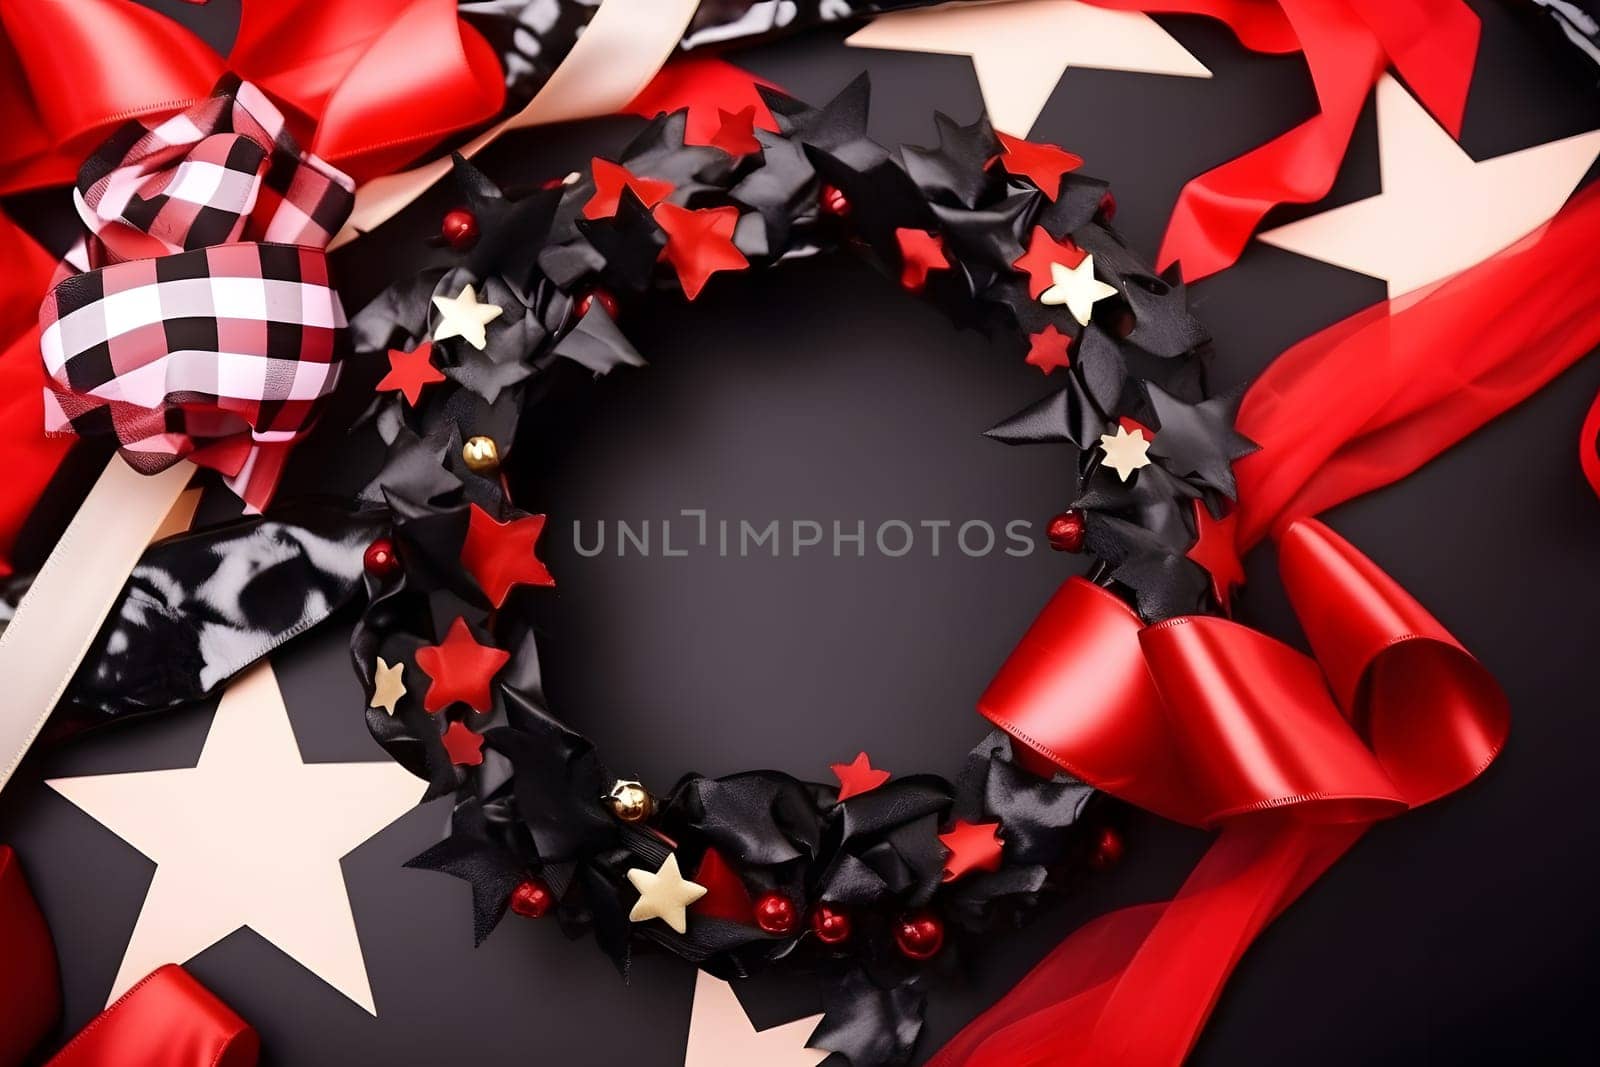 white, black, red stars and ribbons on black background - celebration background, neural network generated image by z1b